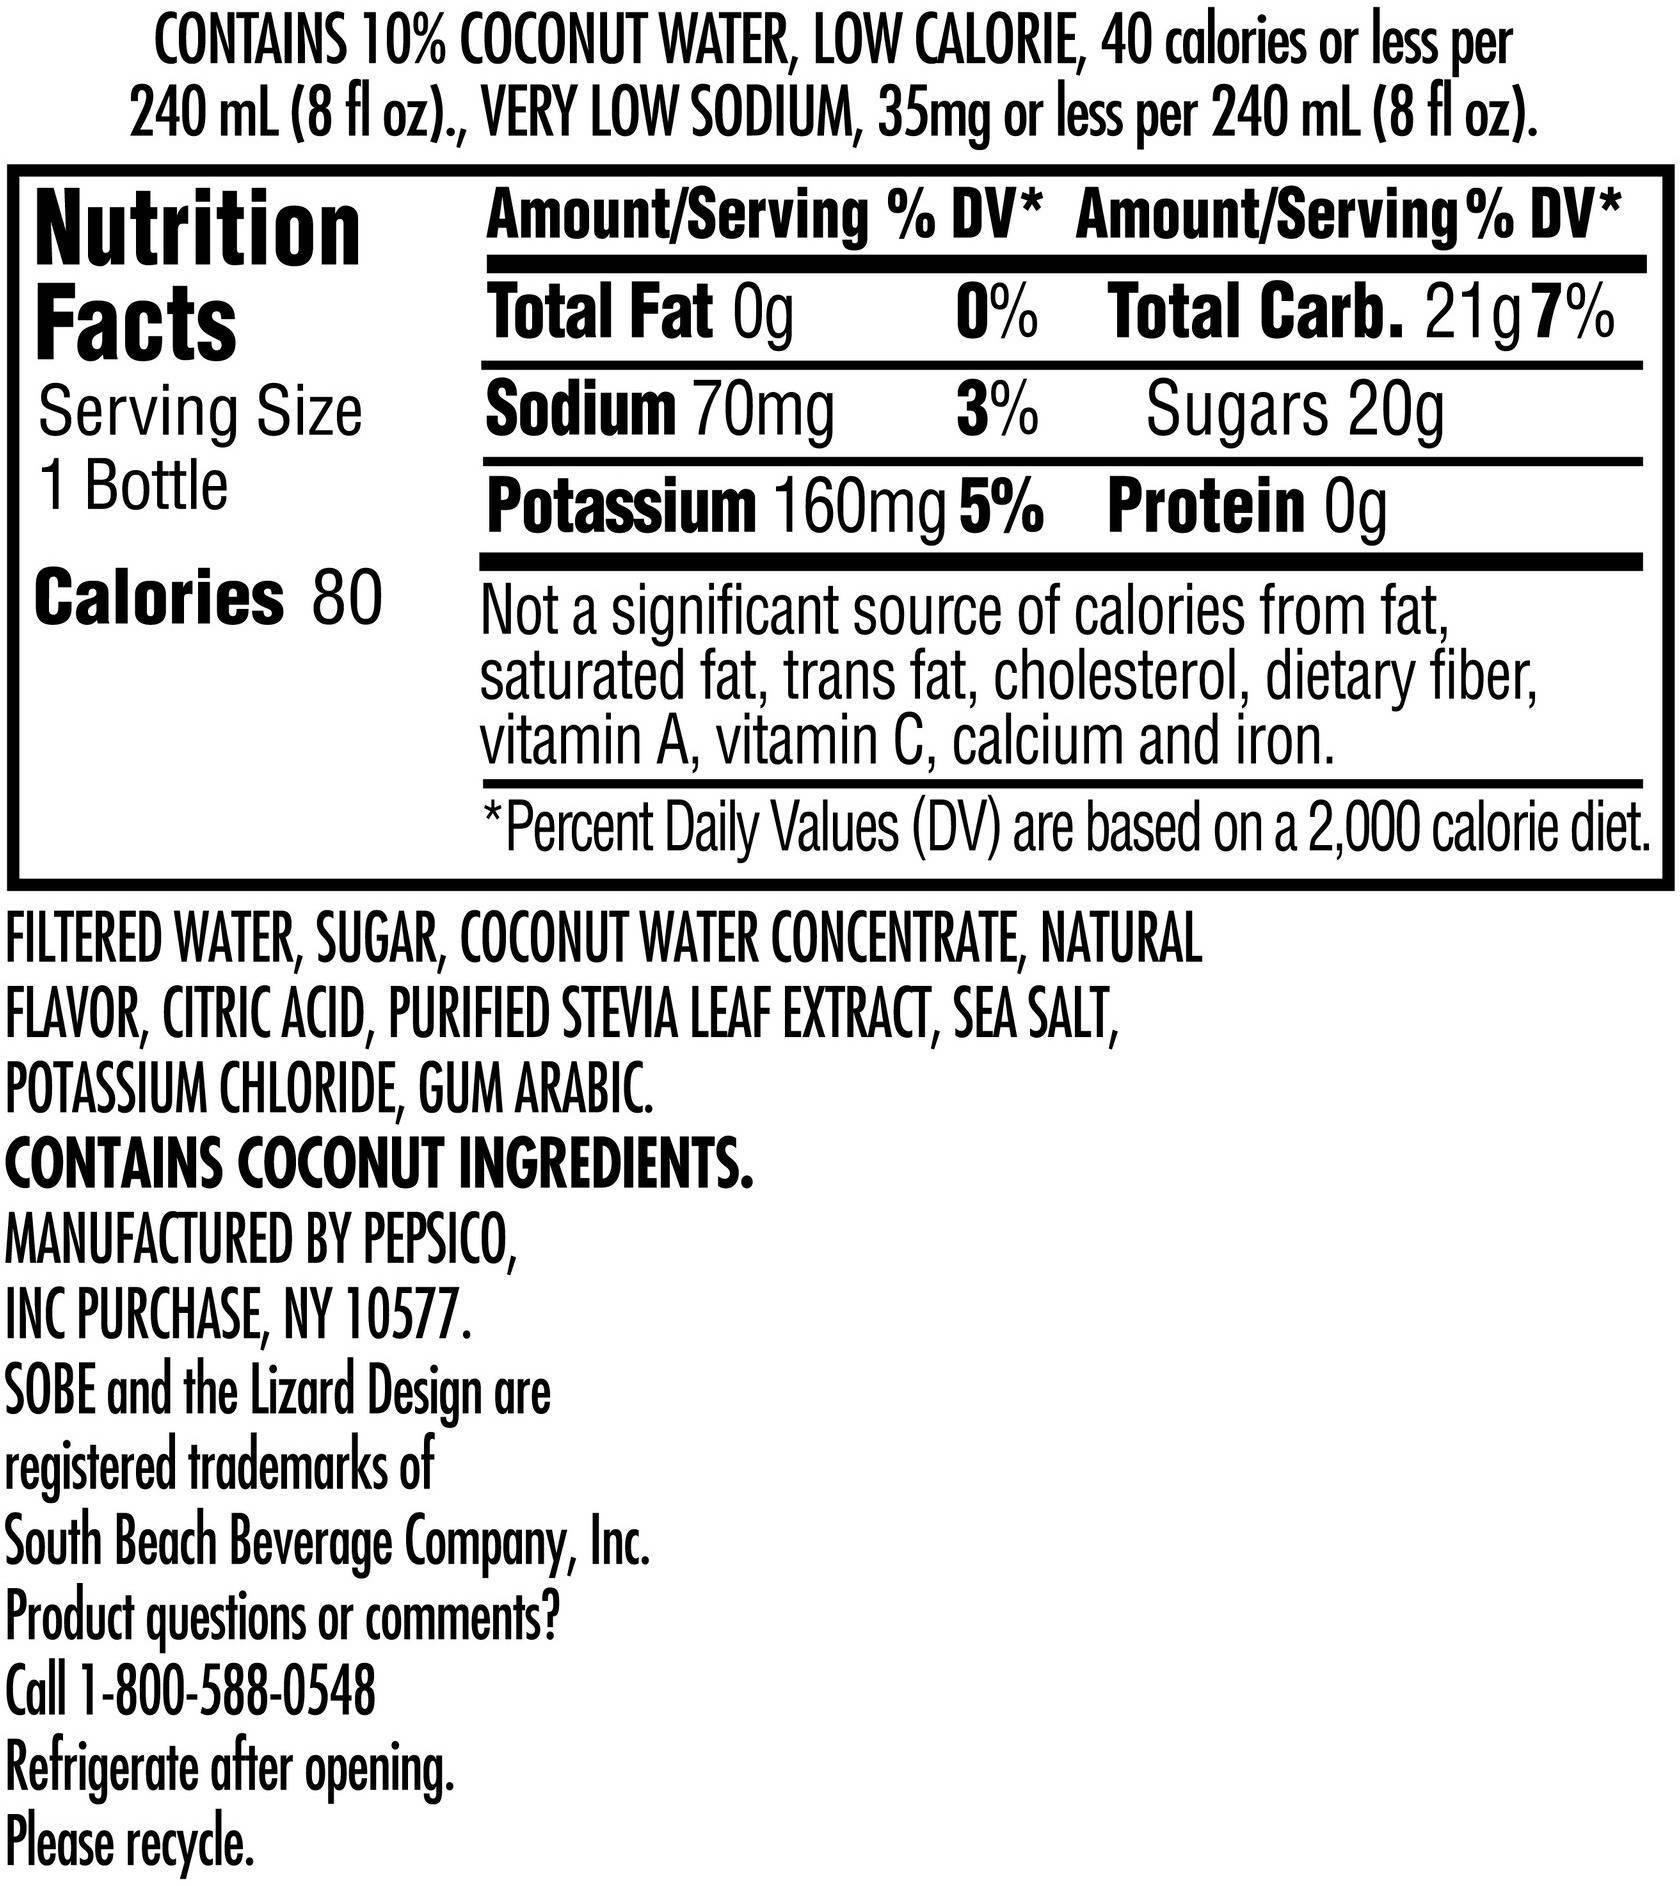 Image describing nutrition information for product SoBeWater Pacific Coconut 80cal